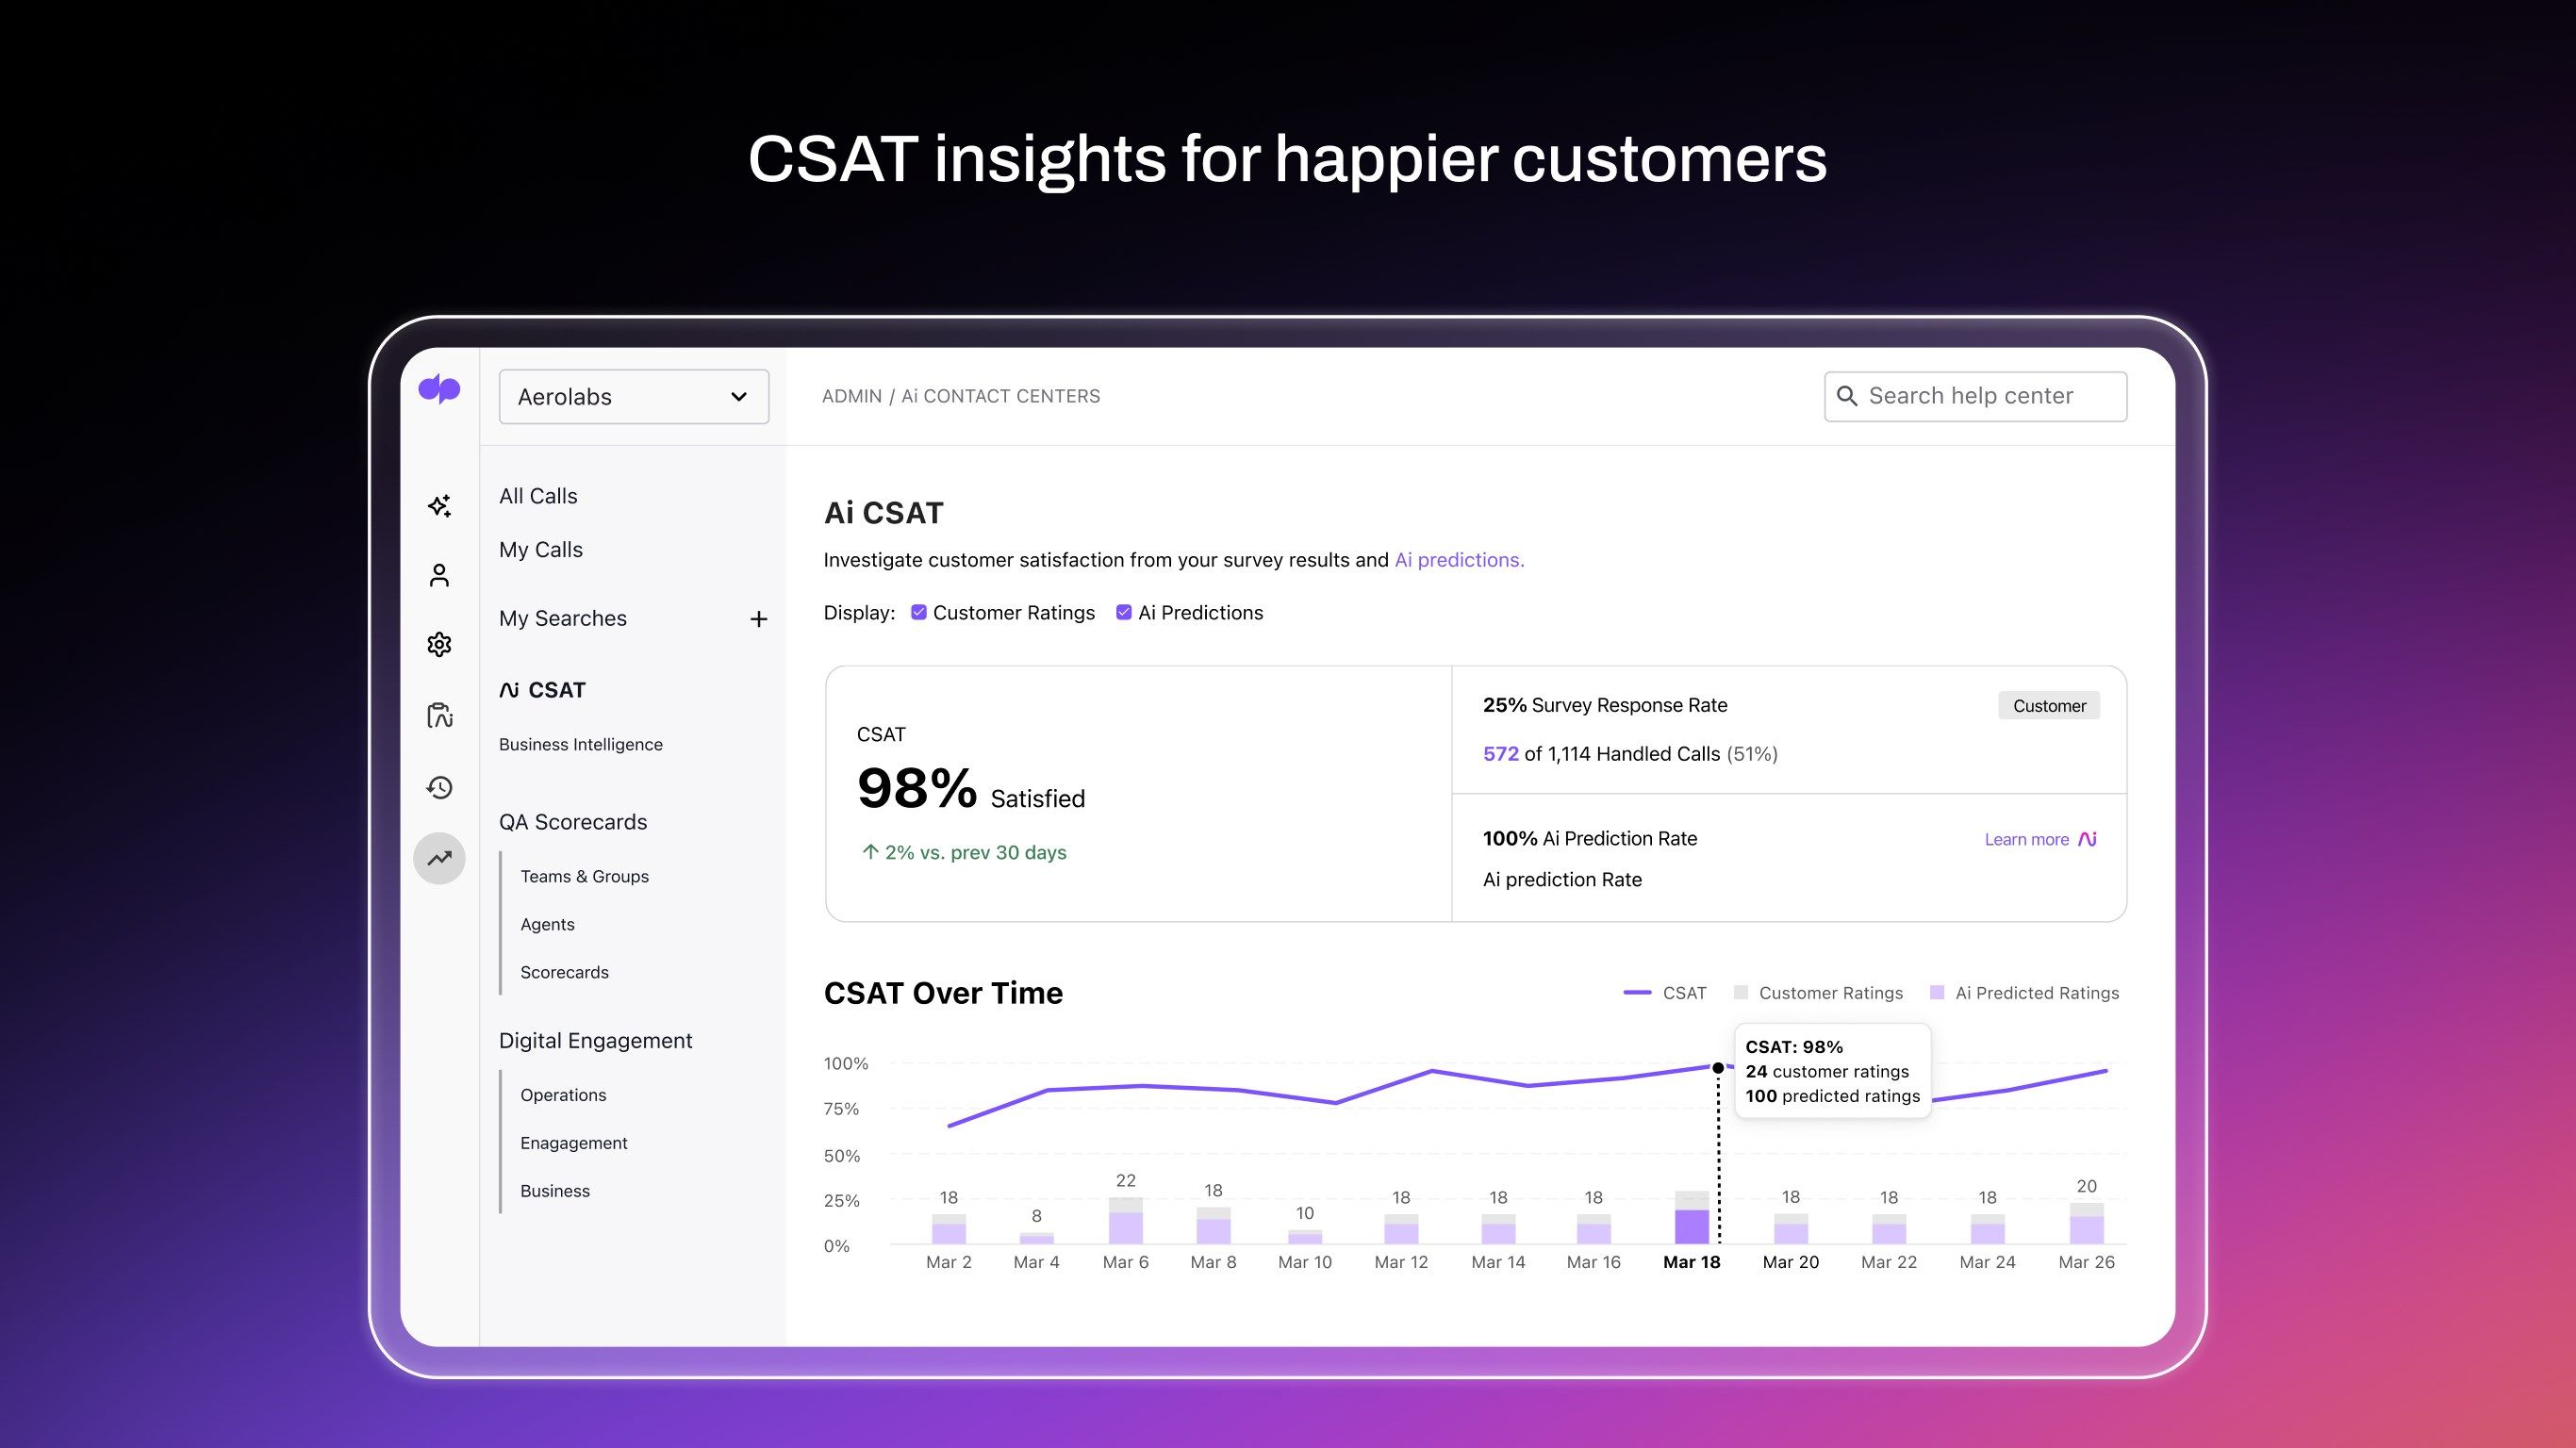 CSAT insights for happier customers